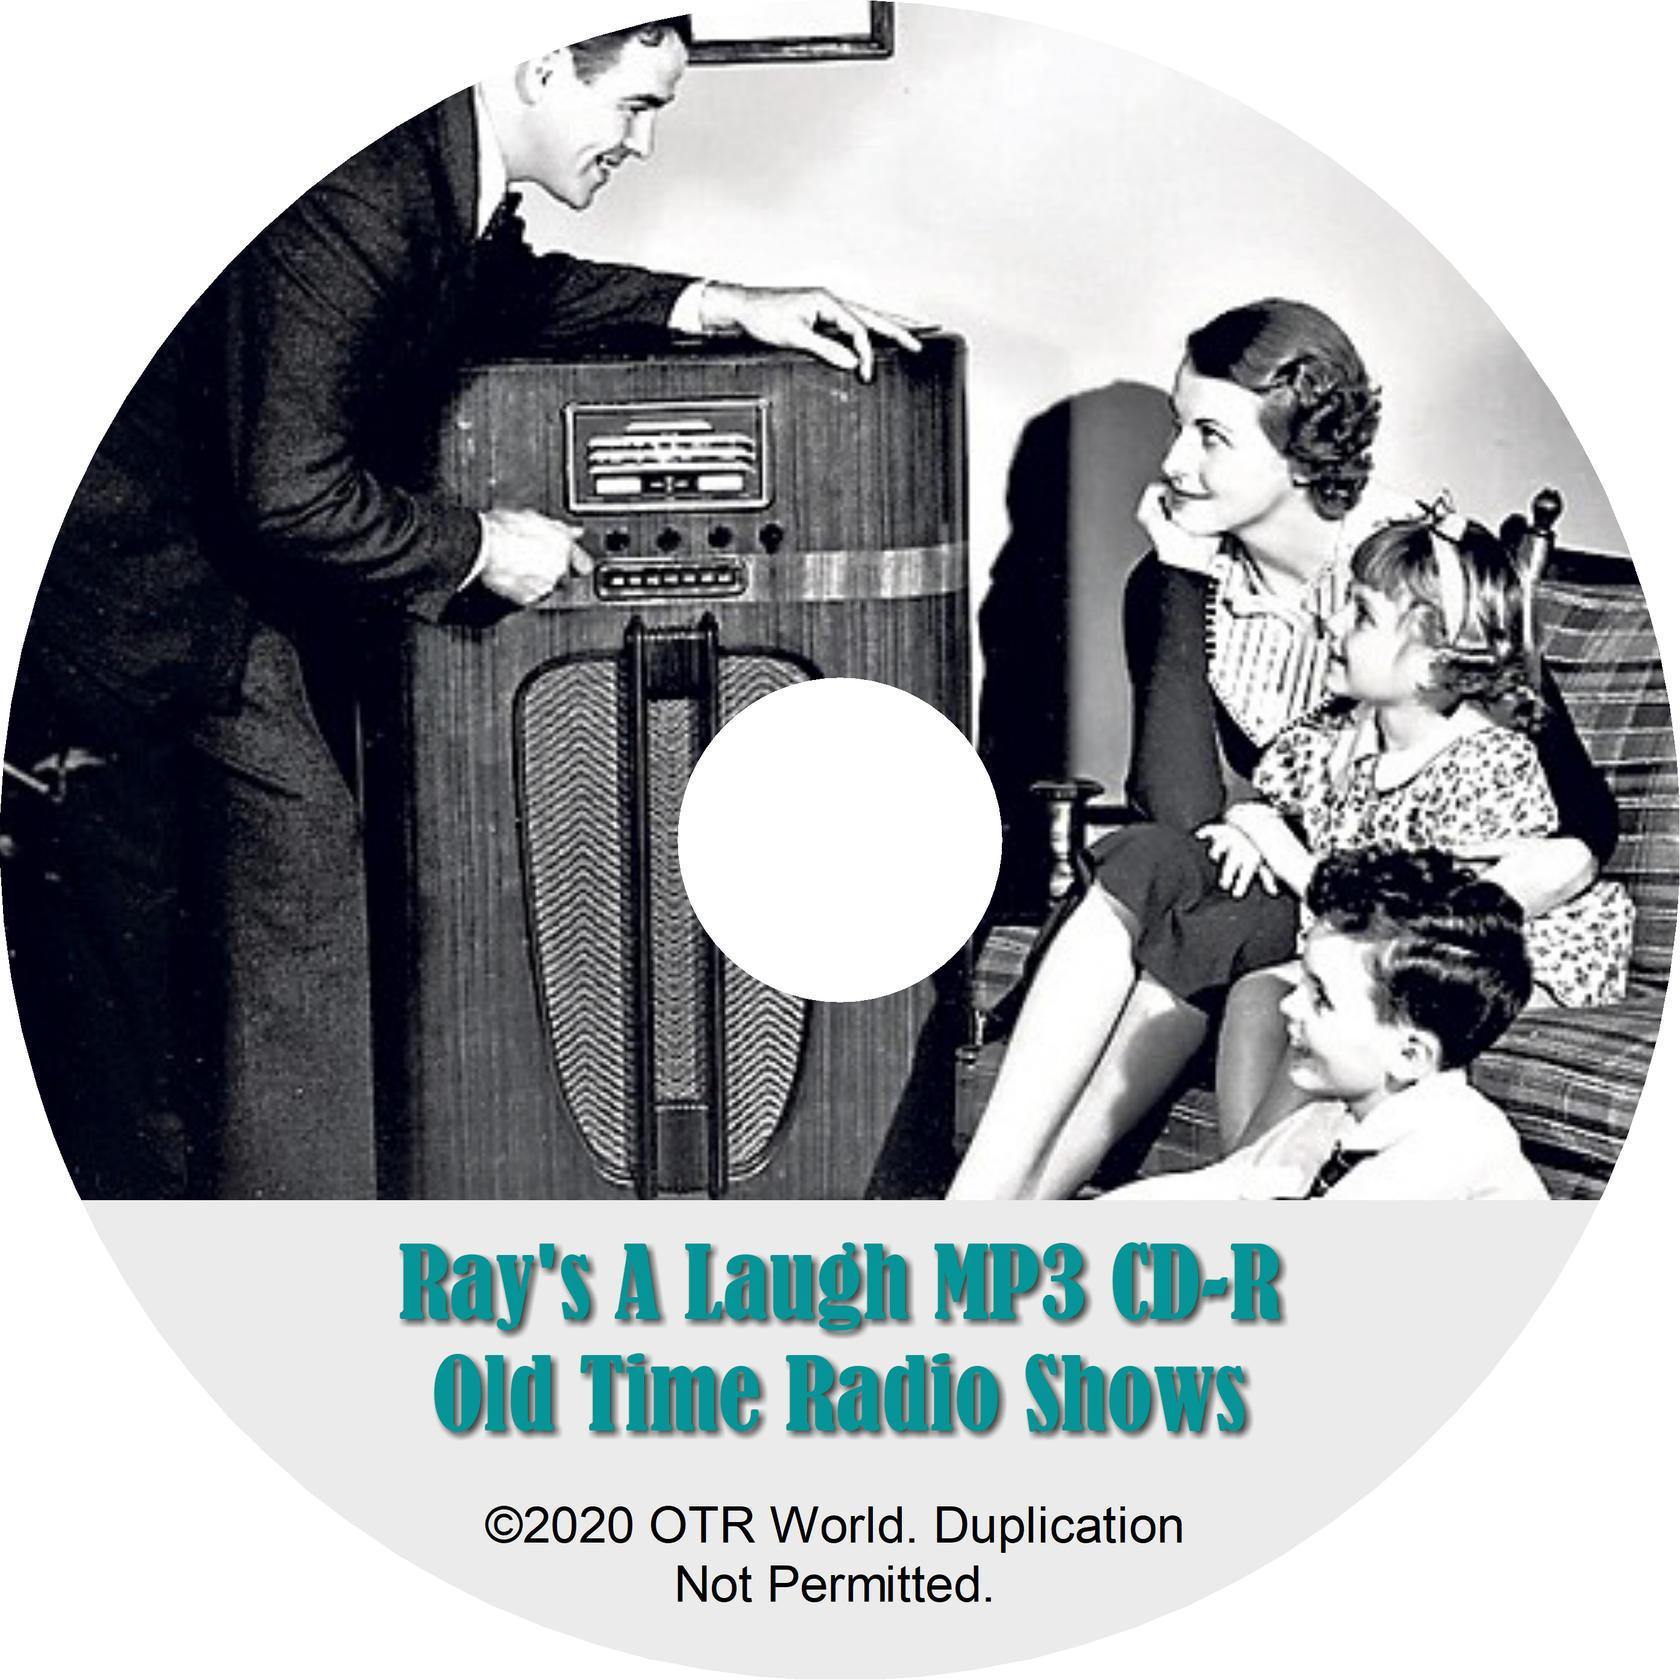 Ray's A Laugh Old Time Radio Shows OTR OTRS 3 Episodes On MP3 CD-R - OTR World